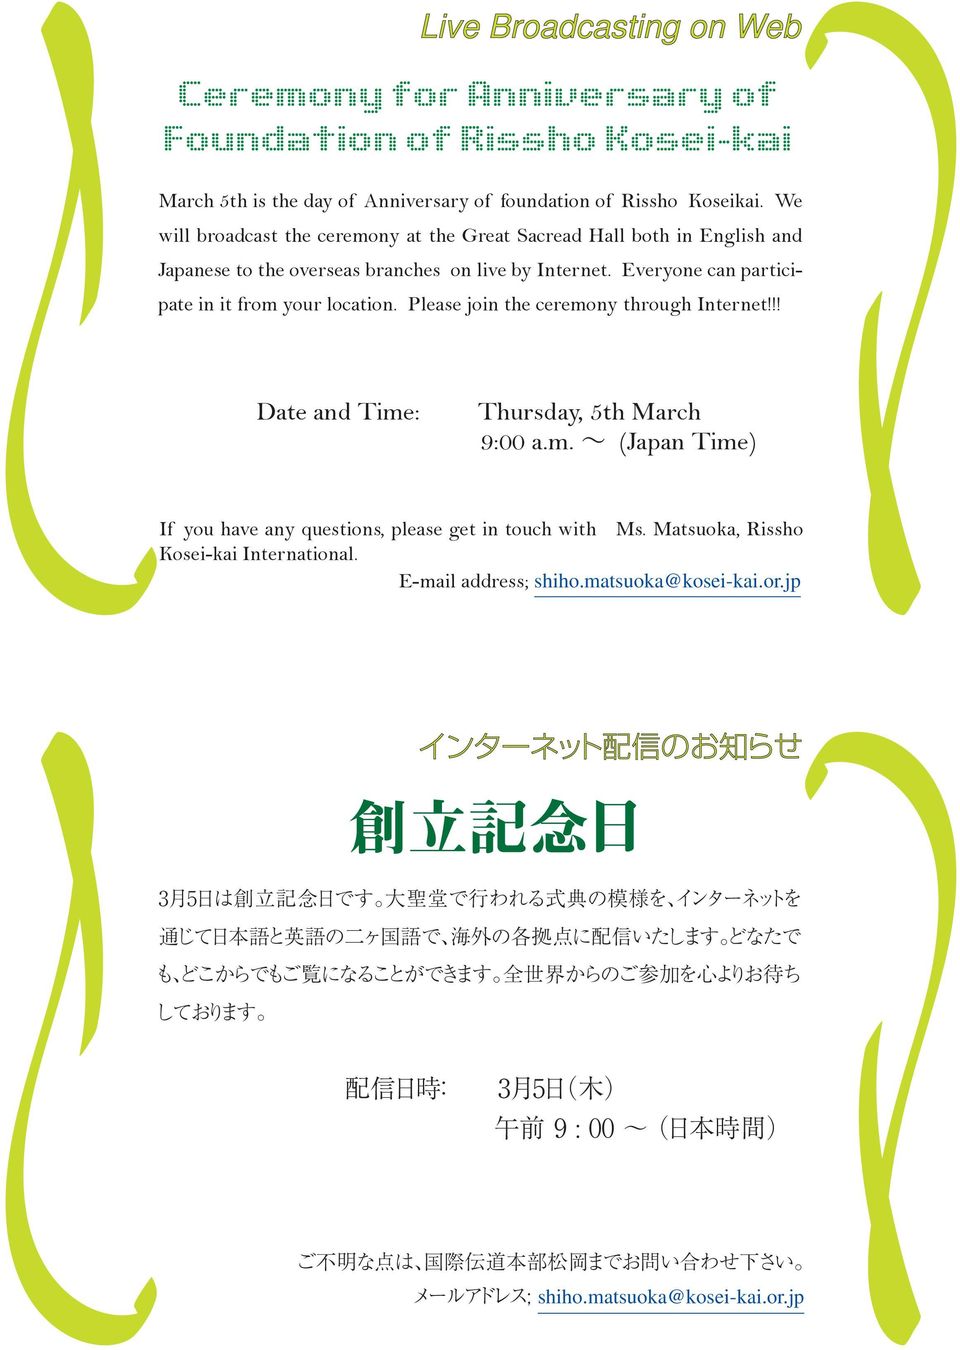 Everyone can participate in it from your location. Please join the ceremony through Internet!!! Date and Time: Thursday, 5th March 9:00 a.m. ~ (Japan Time) If you have any questions, please get in touch with Ms.